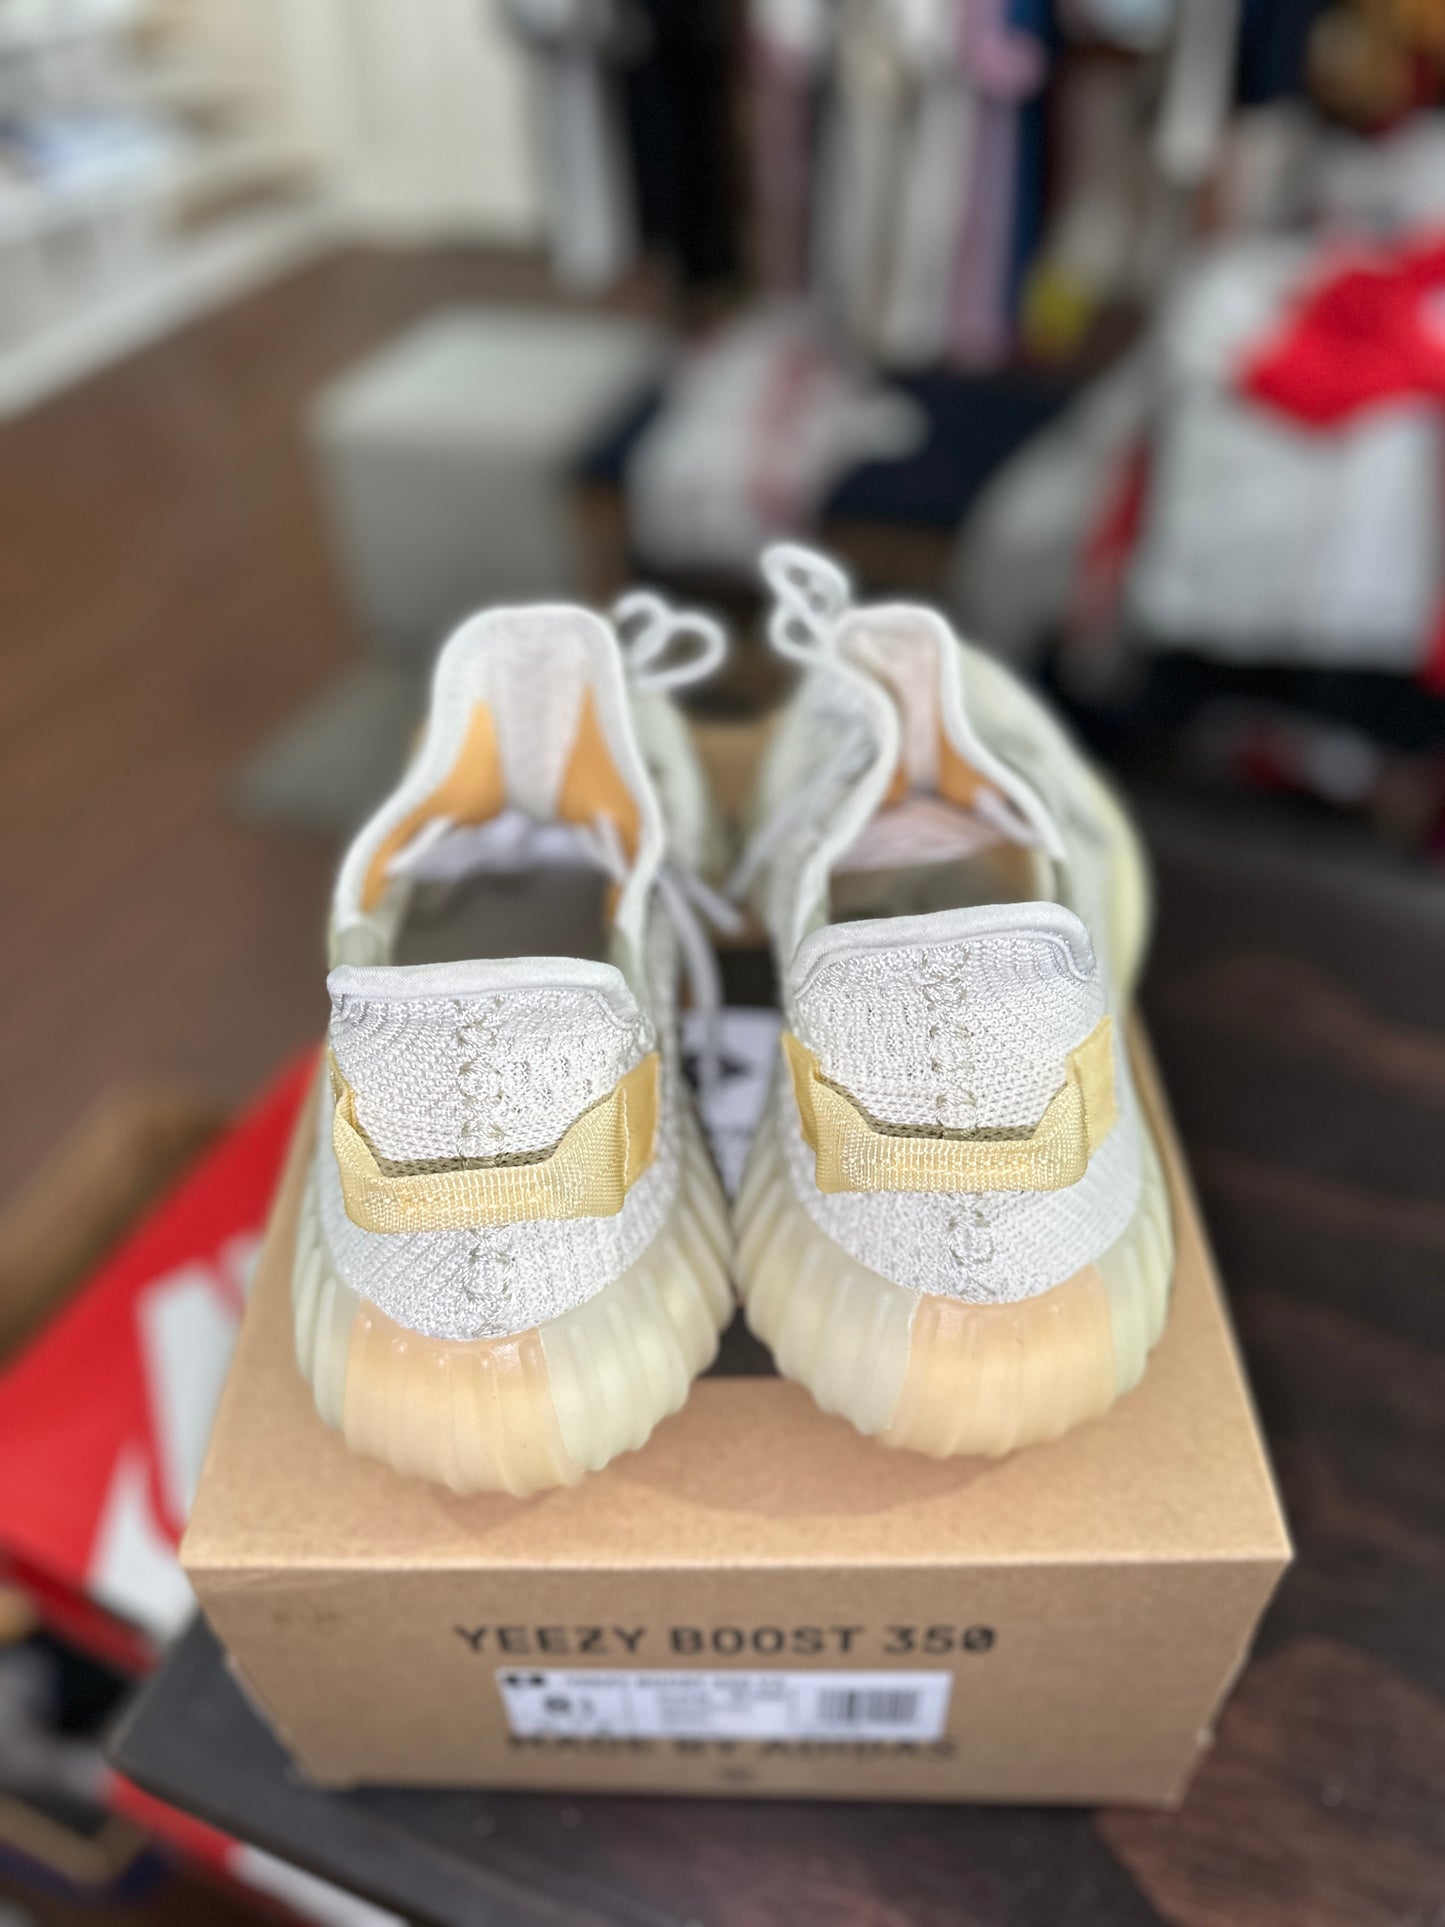 *USED* Yeezy Boost 350 v2 Light (size 8.5)